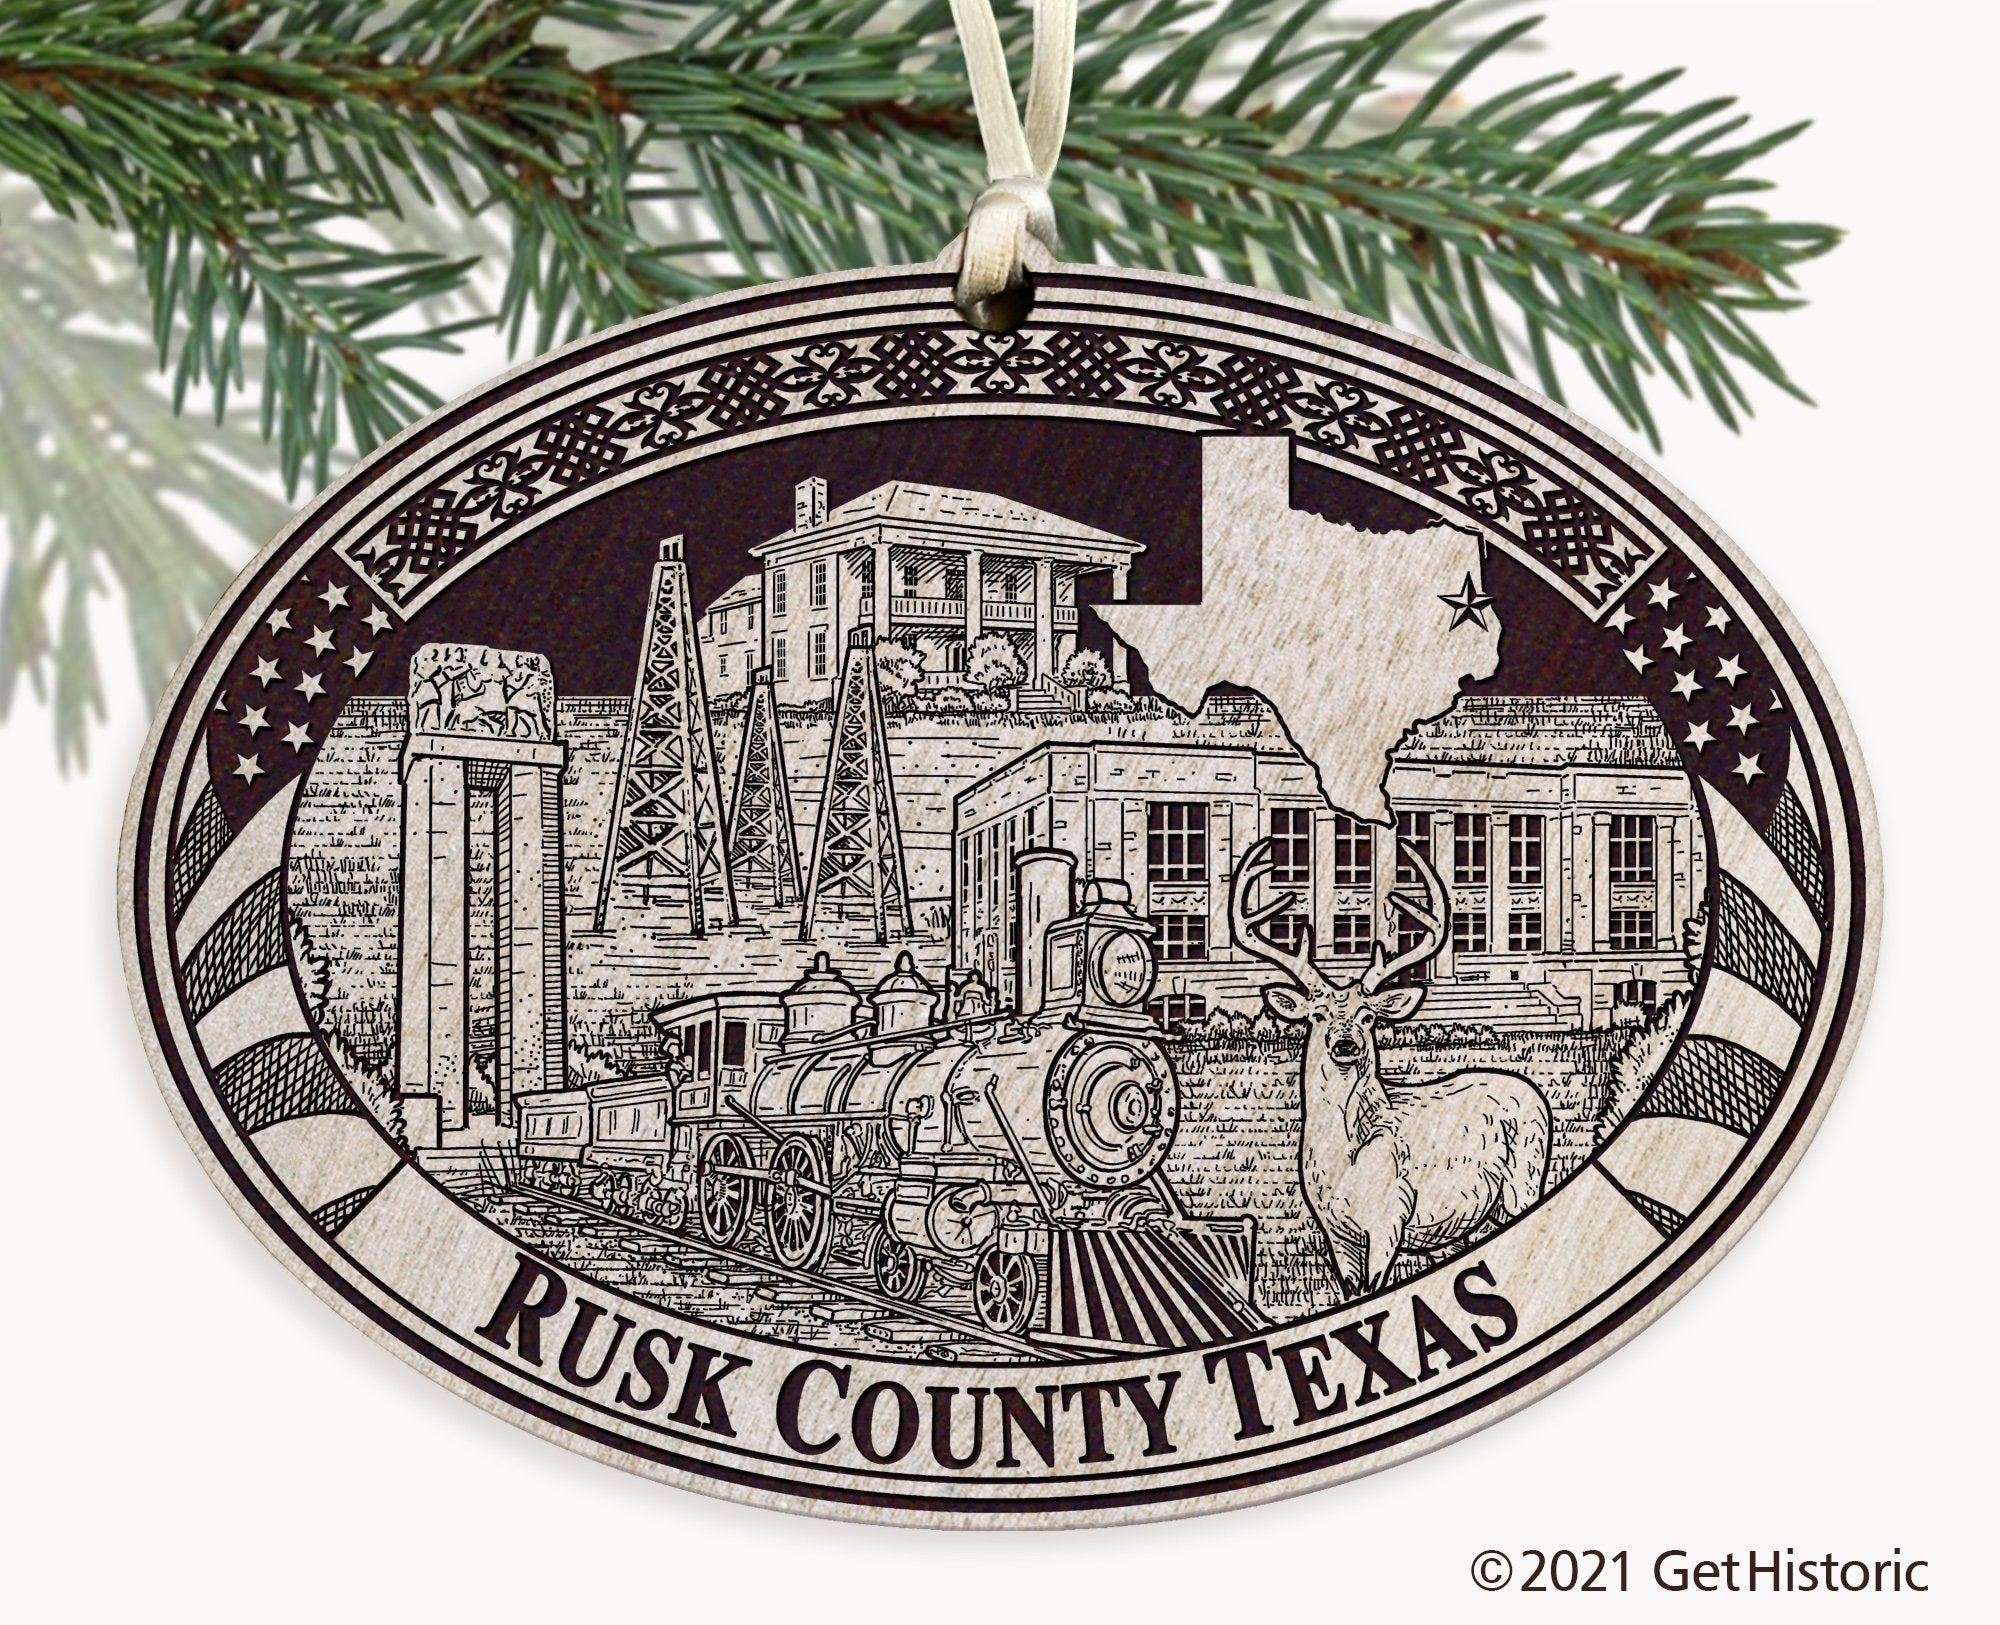 Rusk County Texas Engraved Ornament